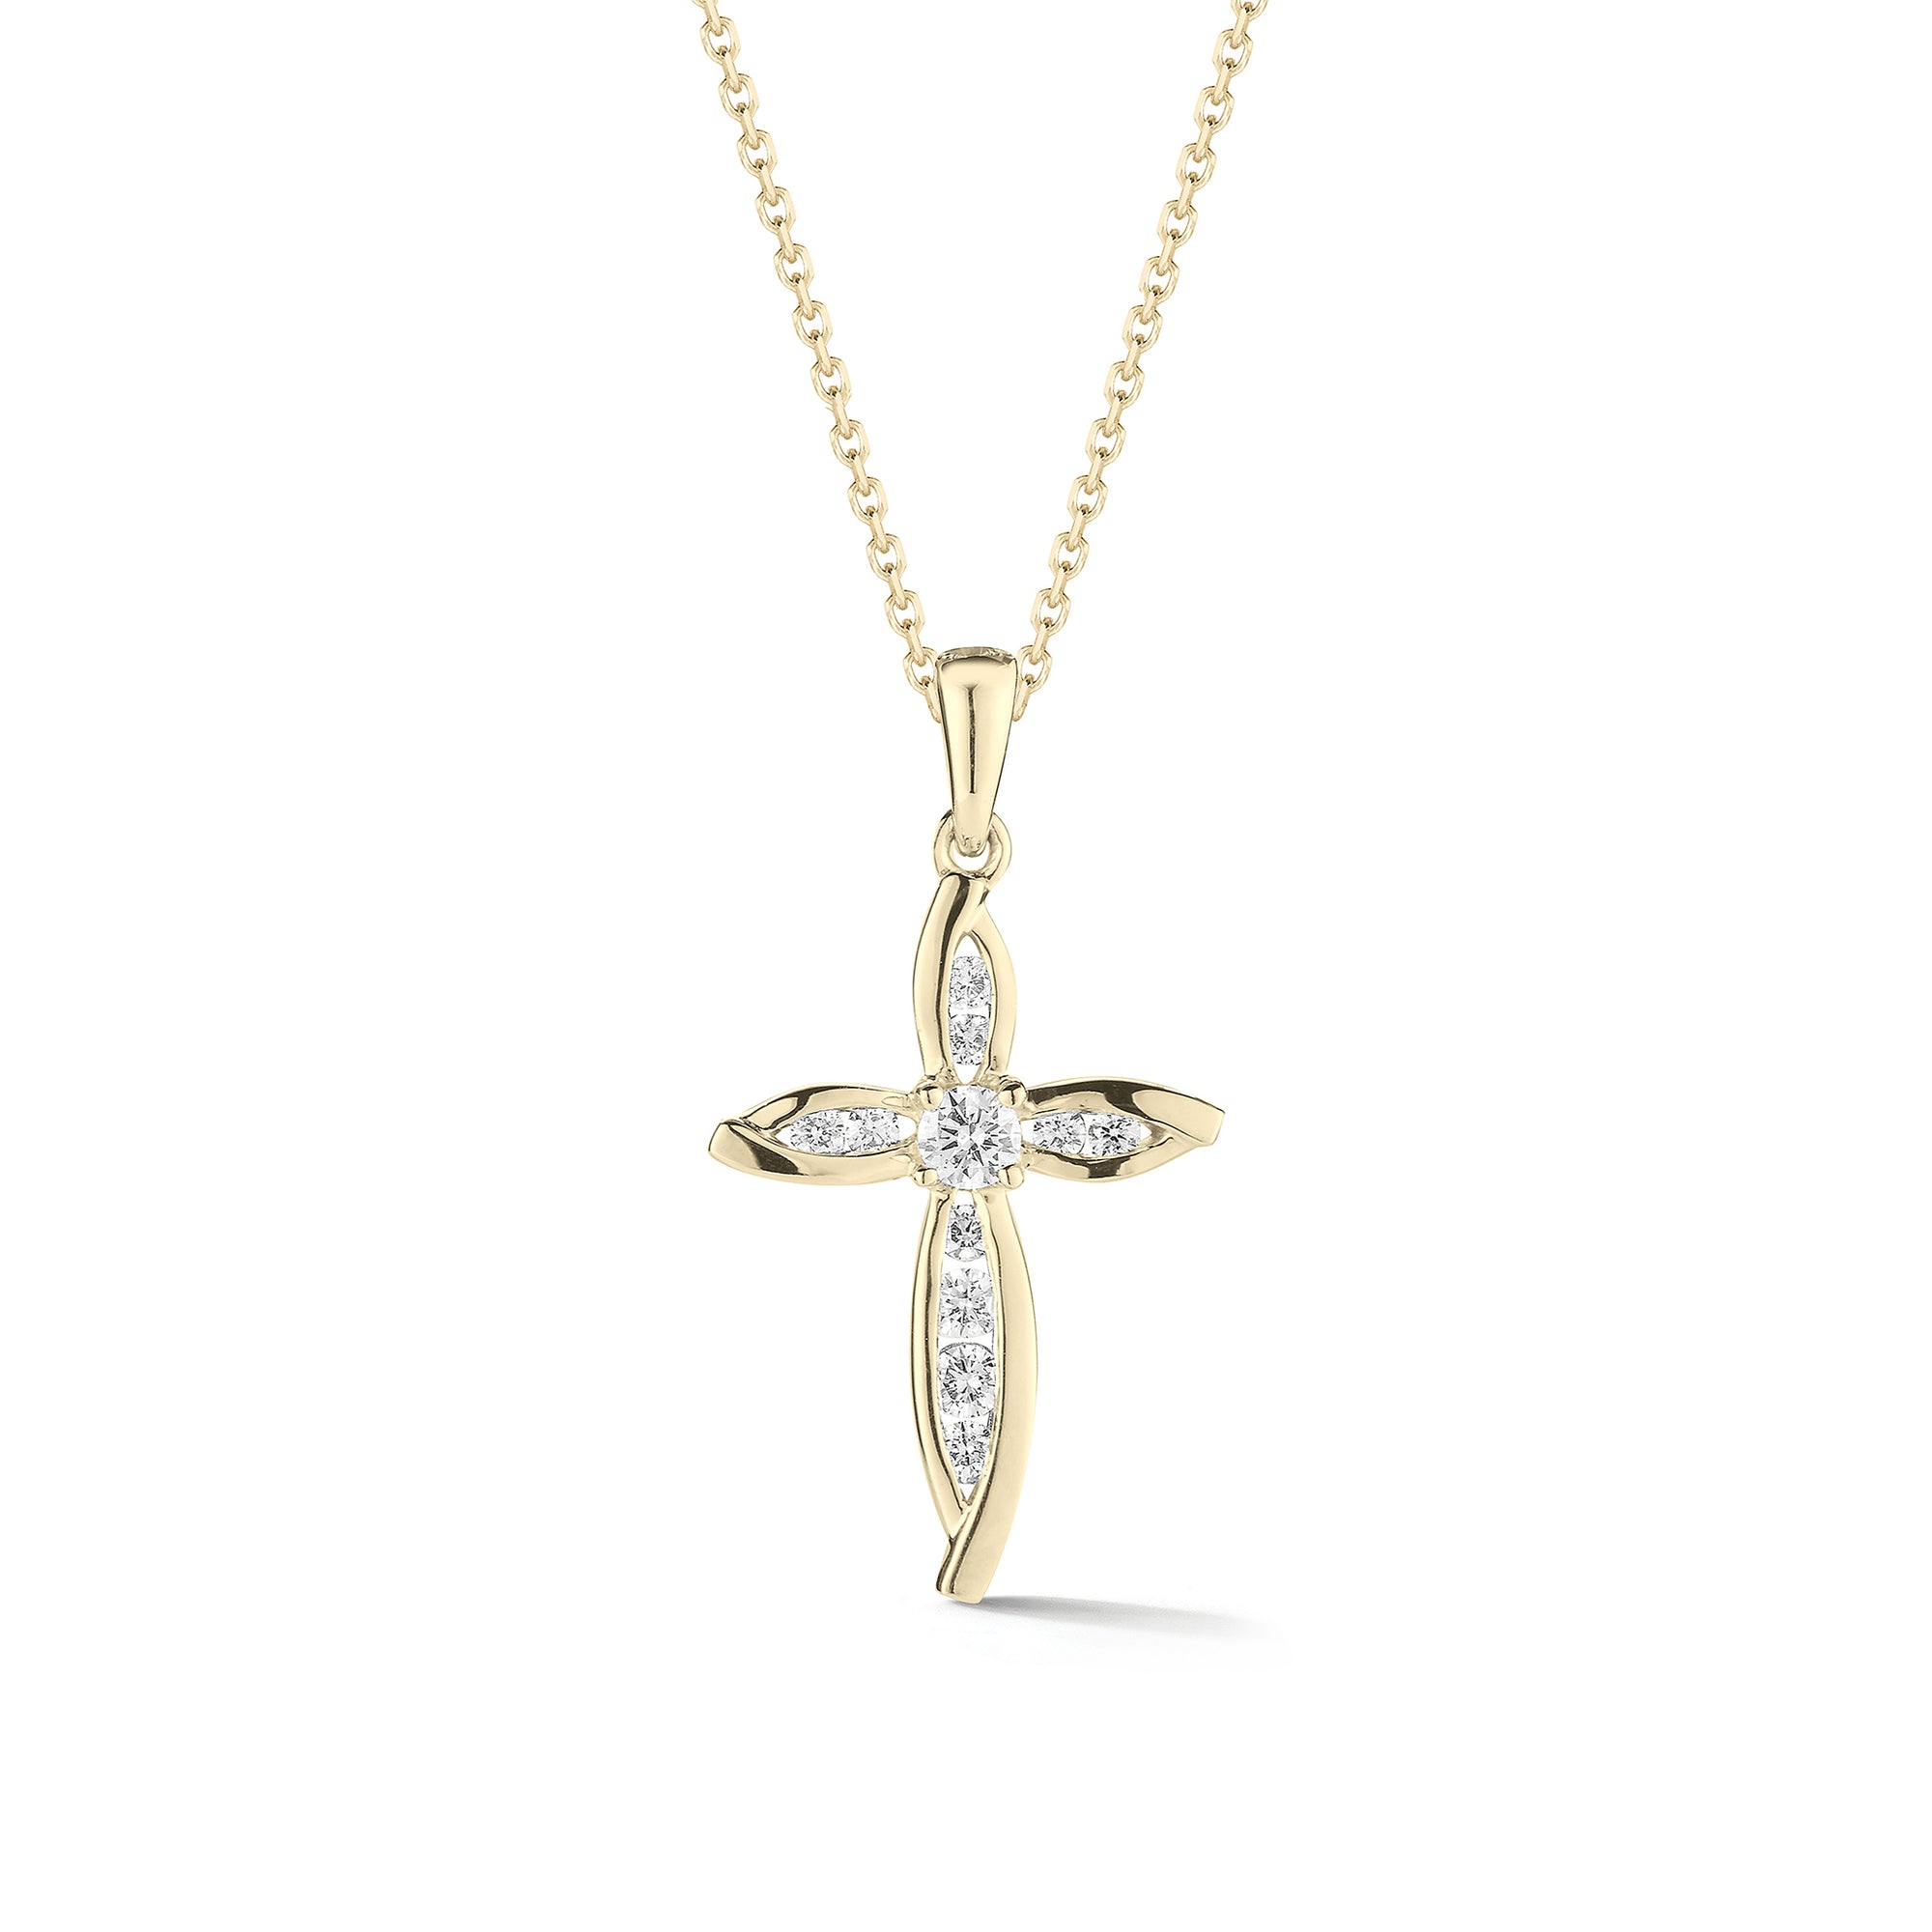 Diamond Pointed Cross Pendant  -14K gold weighing 2.82 grams  -11 round brilliant-cut diamonds totaling 0.19 carats